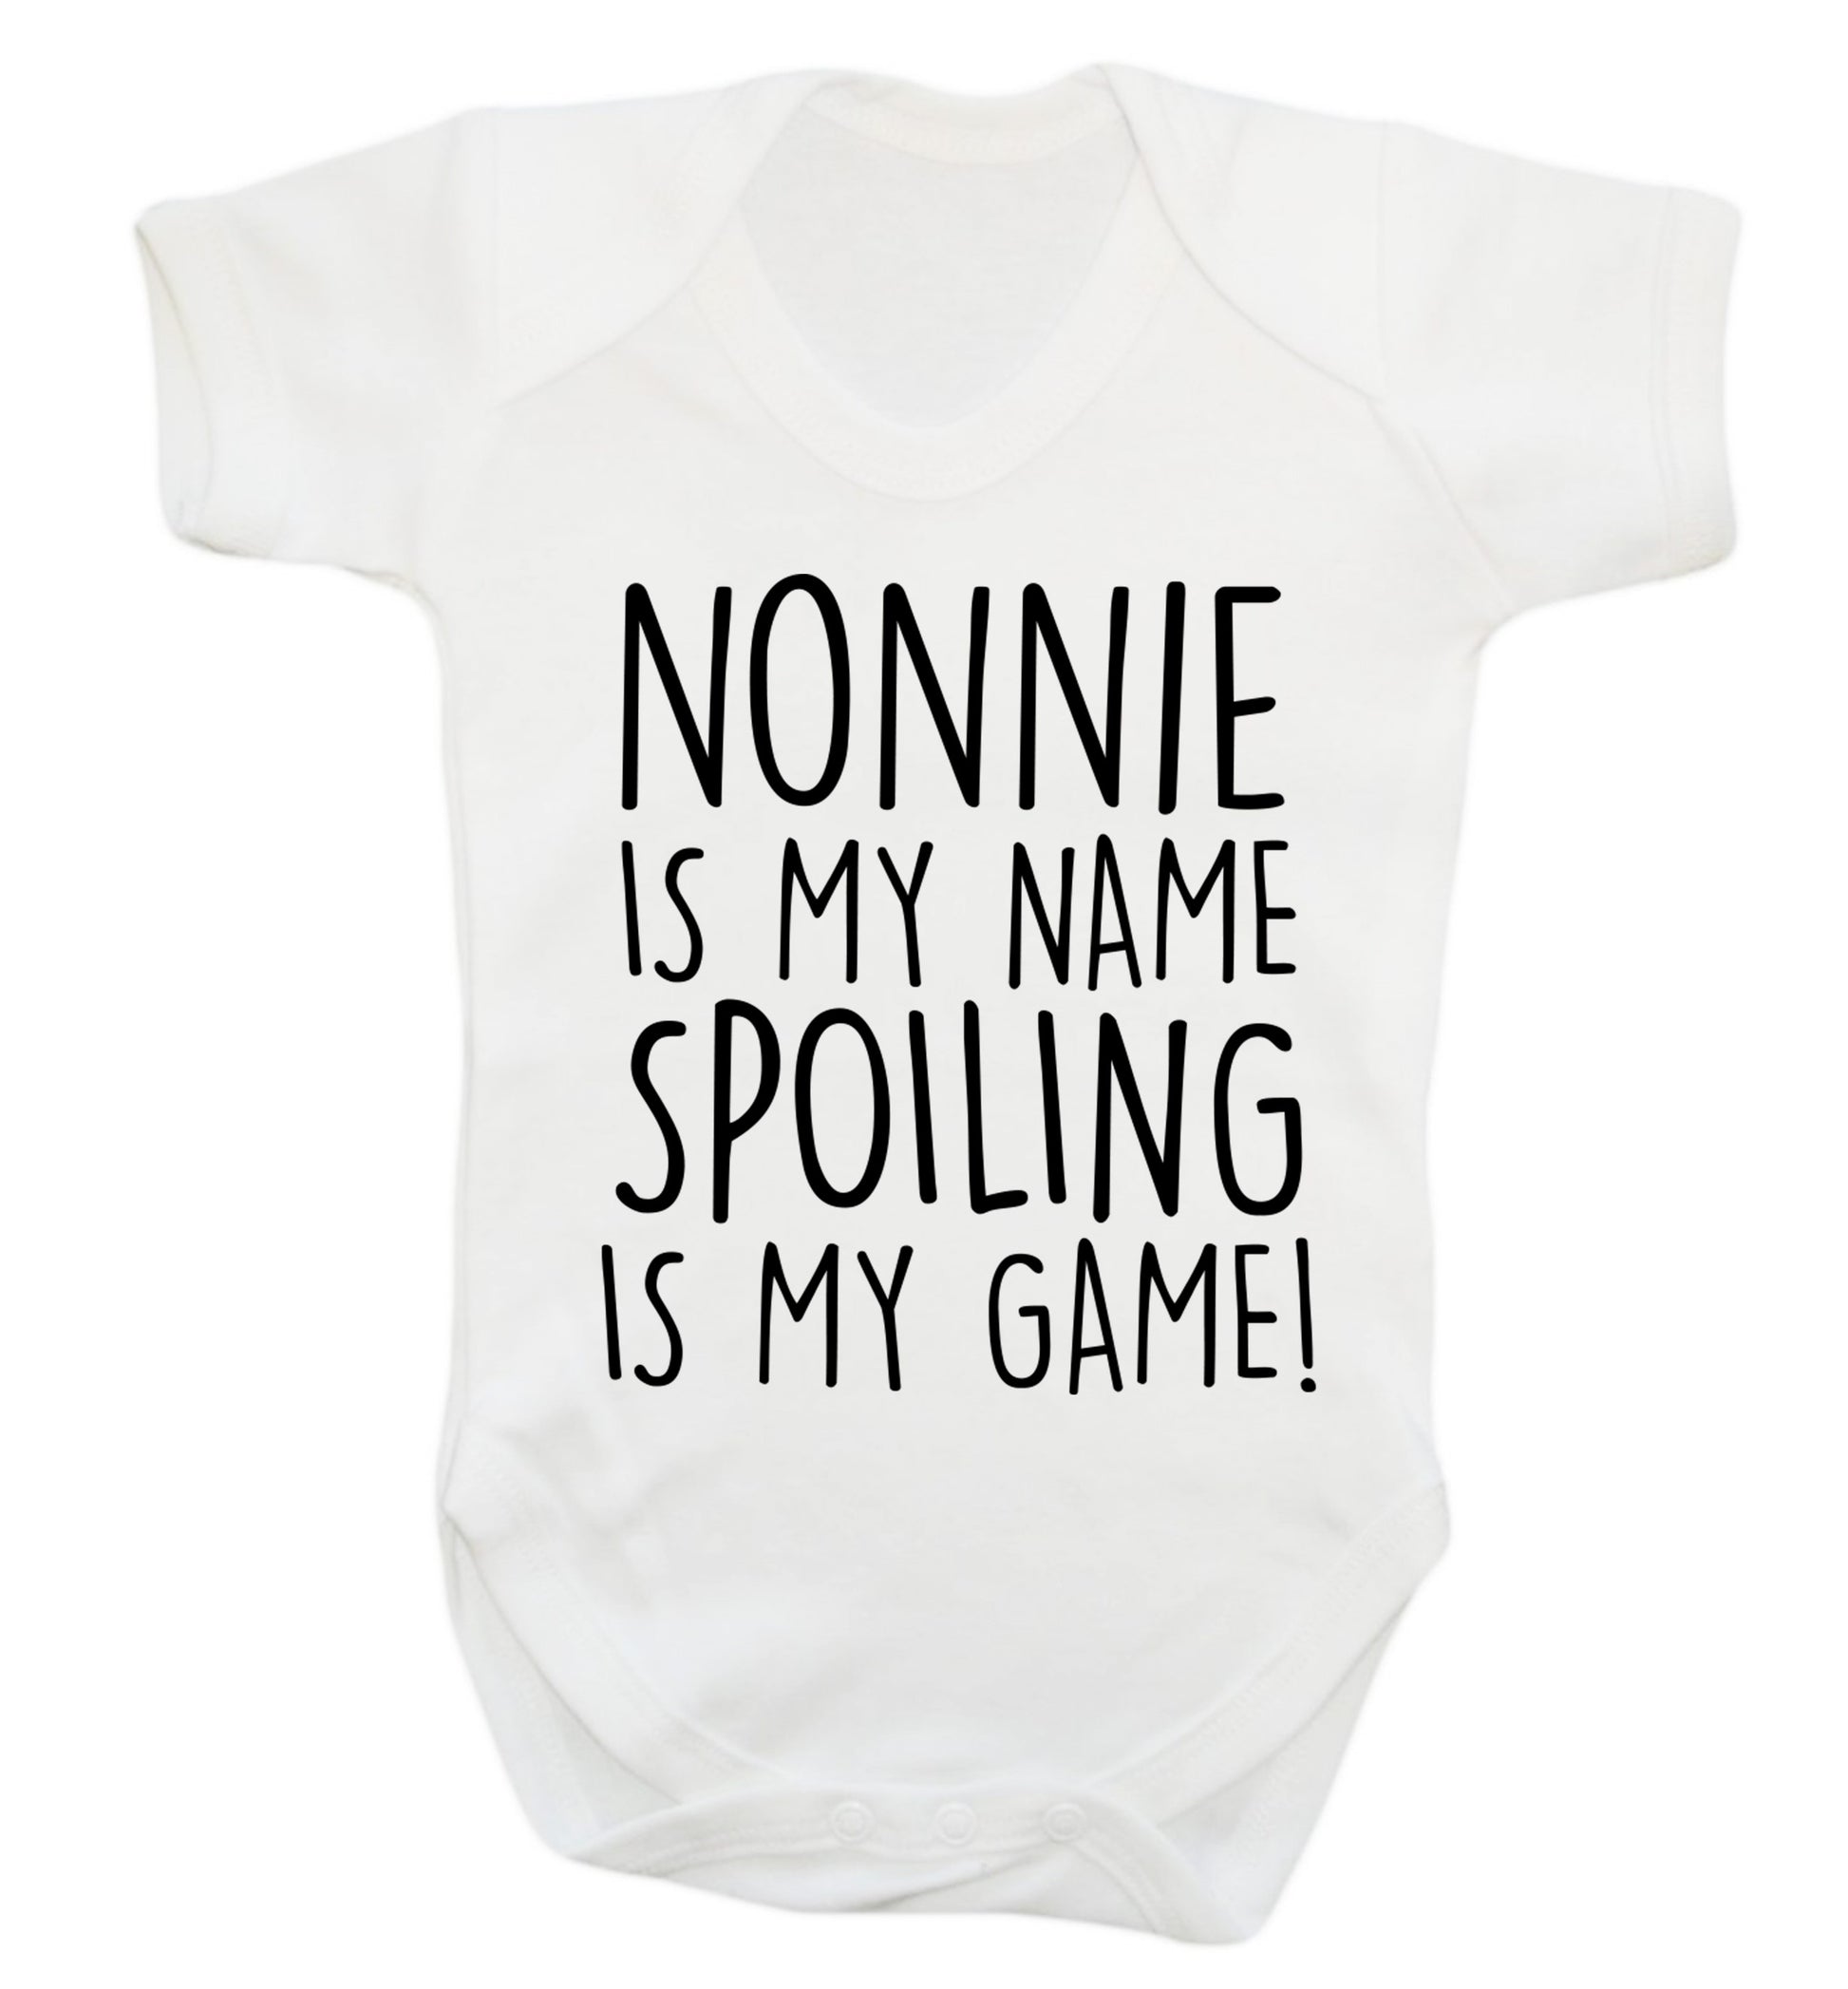 Nonnie is my name, spoiling is my game Baby Vest white 18-24 months